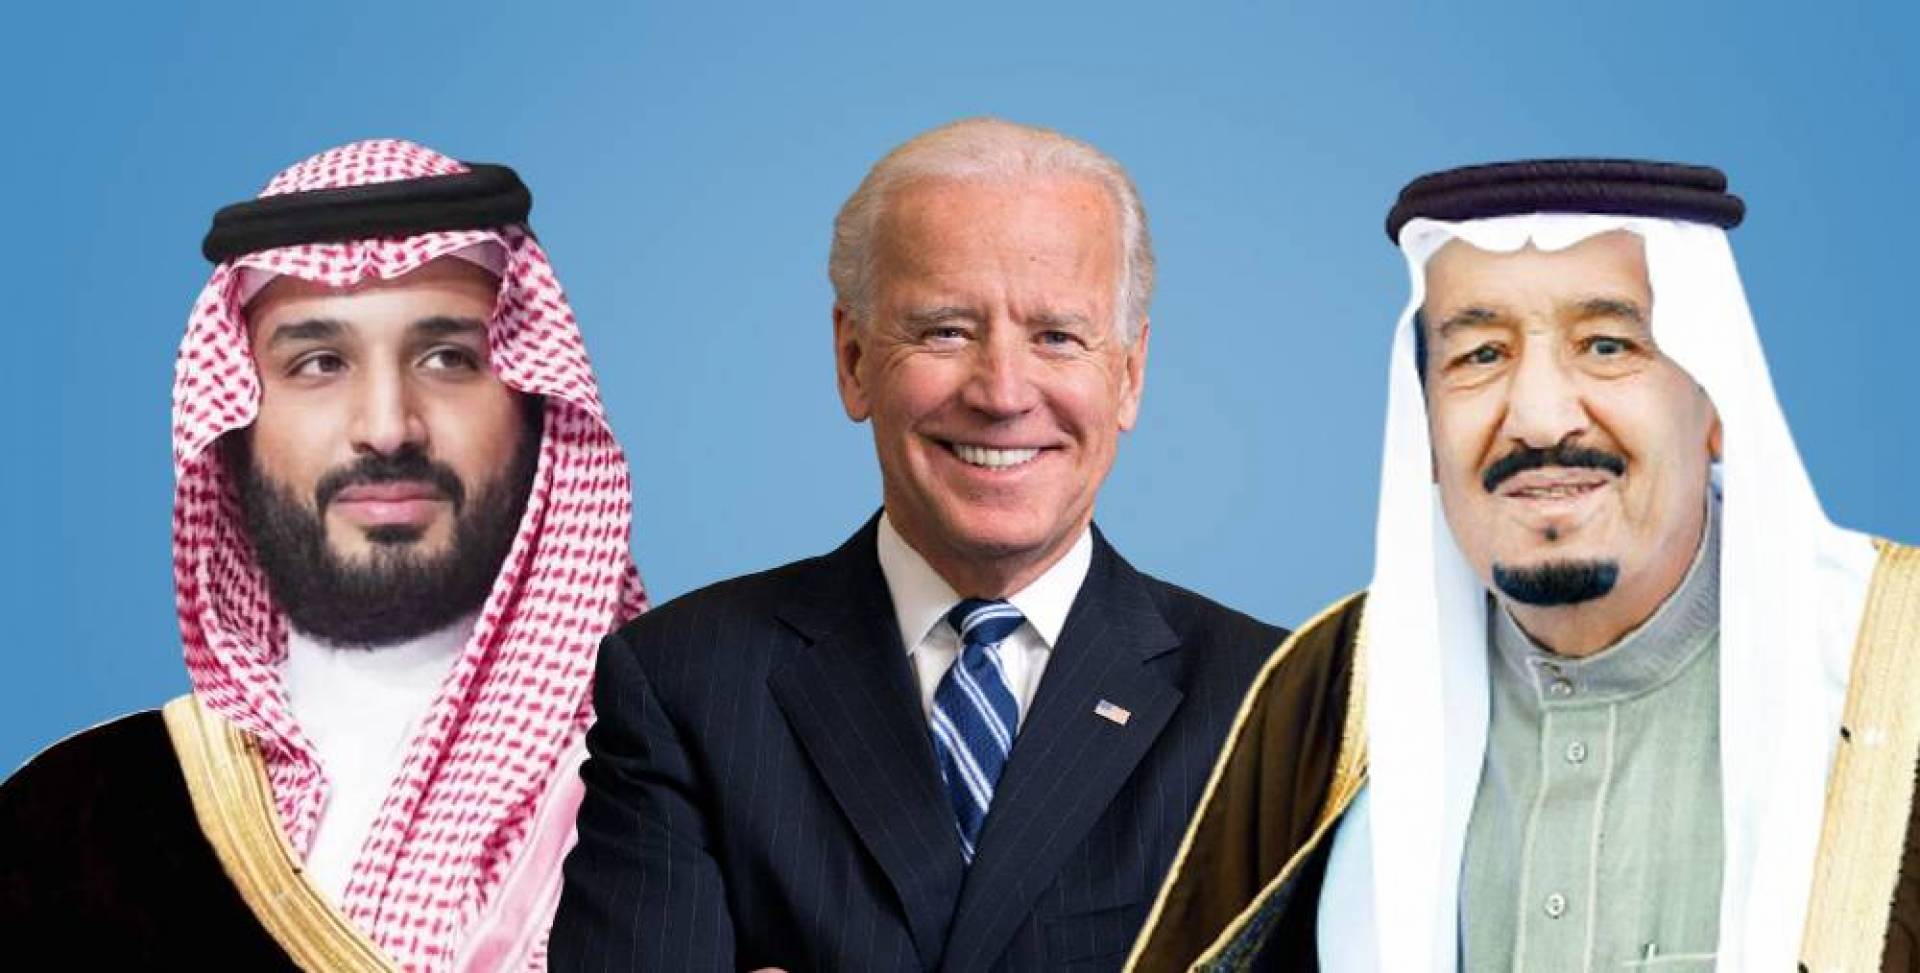 Biden has repeatedly vowed to punish the Saudi crown prince
